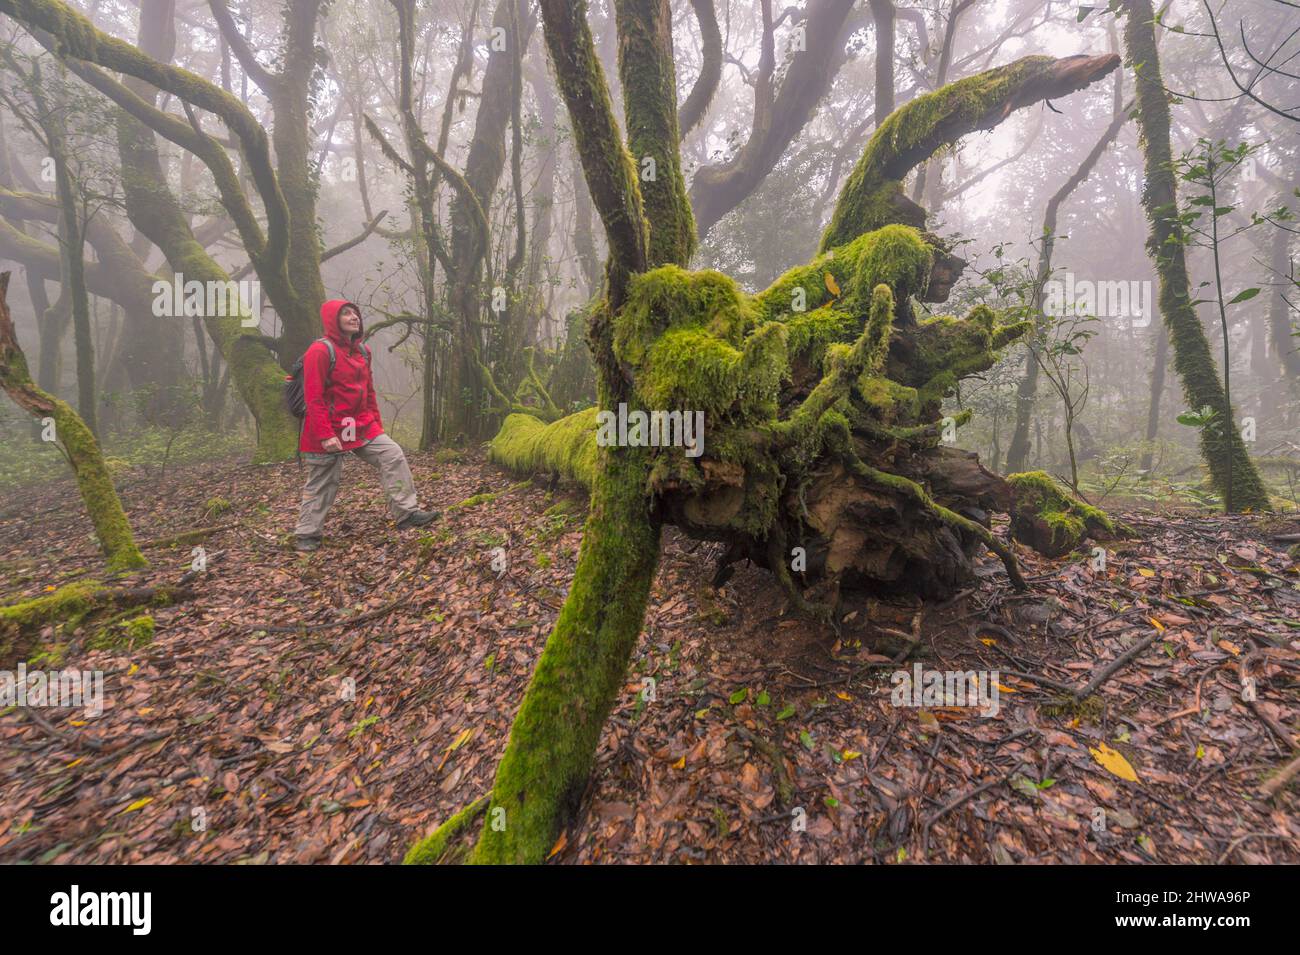 Hiker at the laurel forest in the Garajonay National Park, Canary Islands, La Gomera, Garajonay National Park Stock Photo